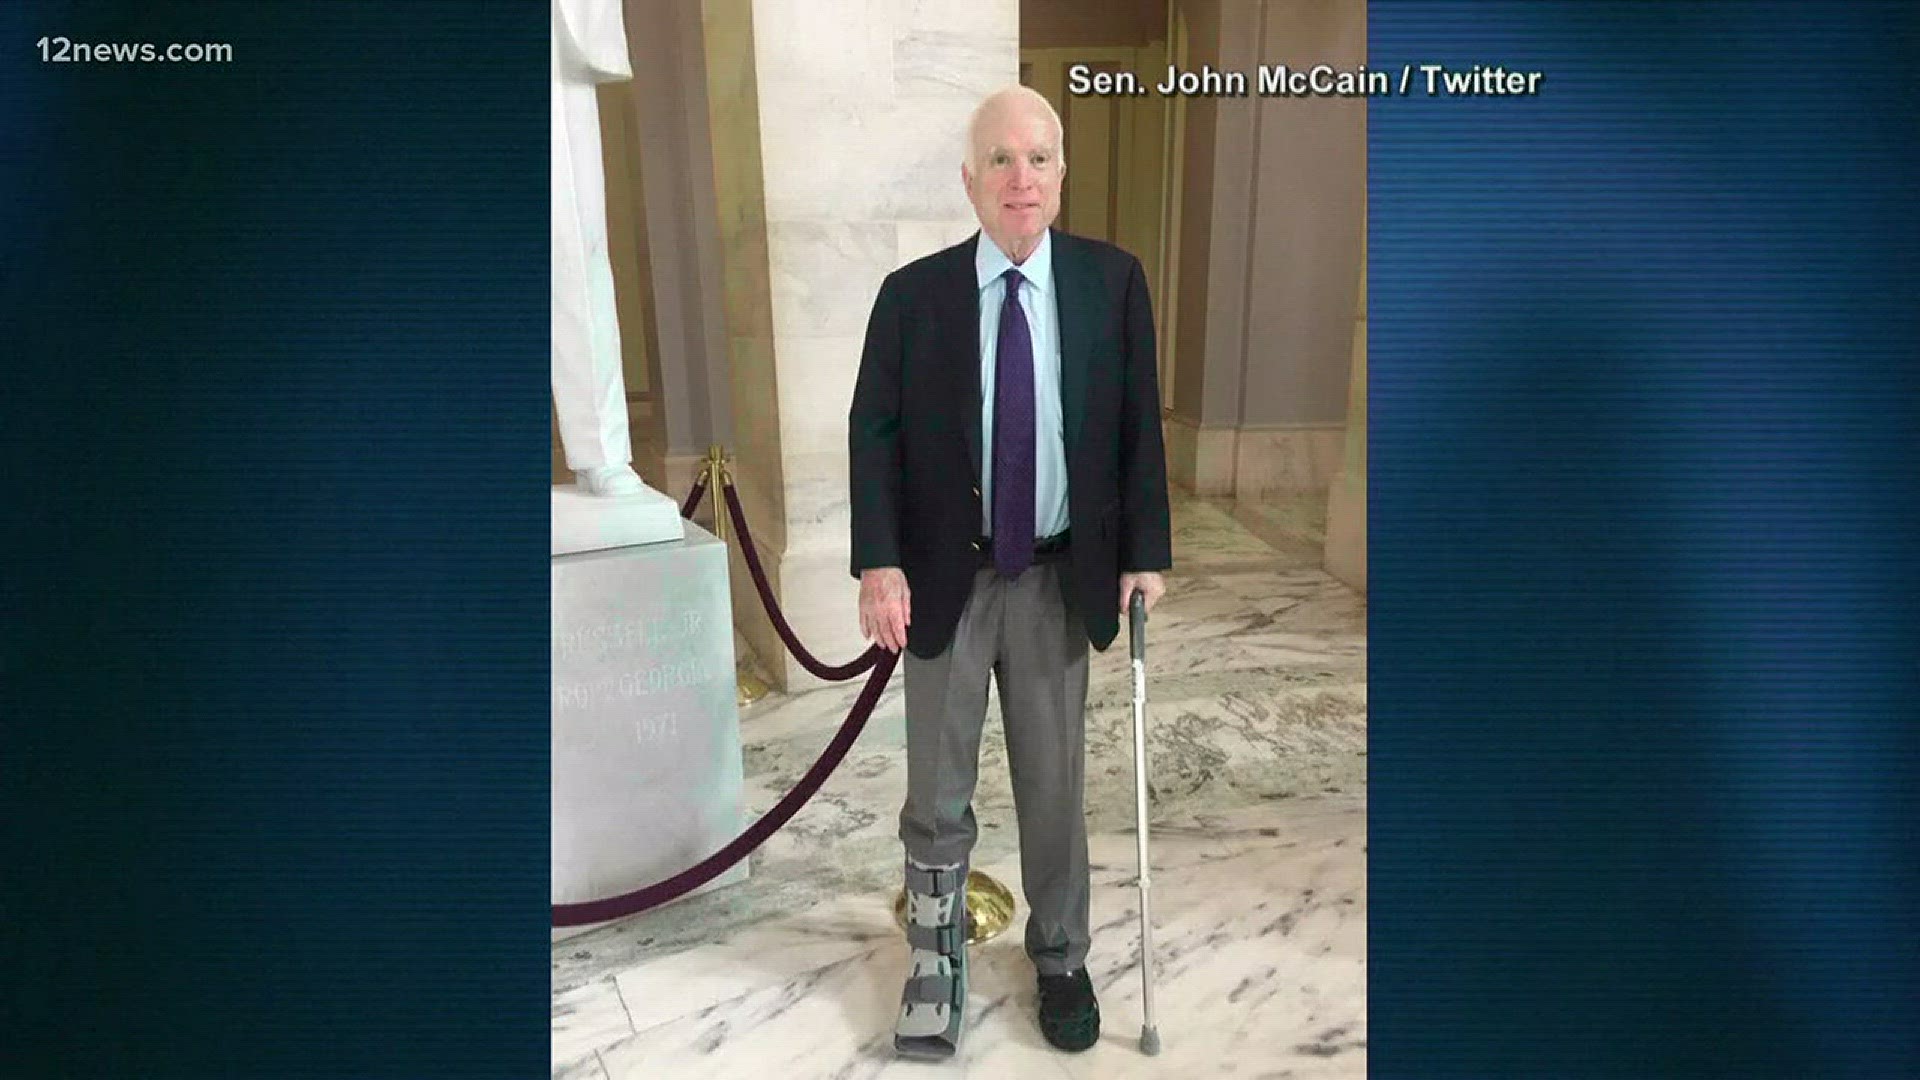 Sen. John McCain's office released a statement saying that the Senator was treated at Walter Reed Medical Center over the weekend.